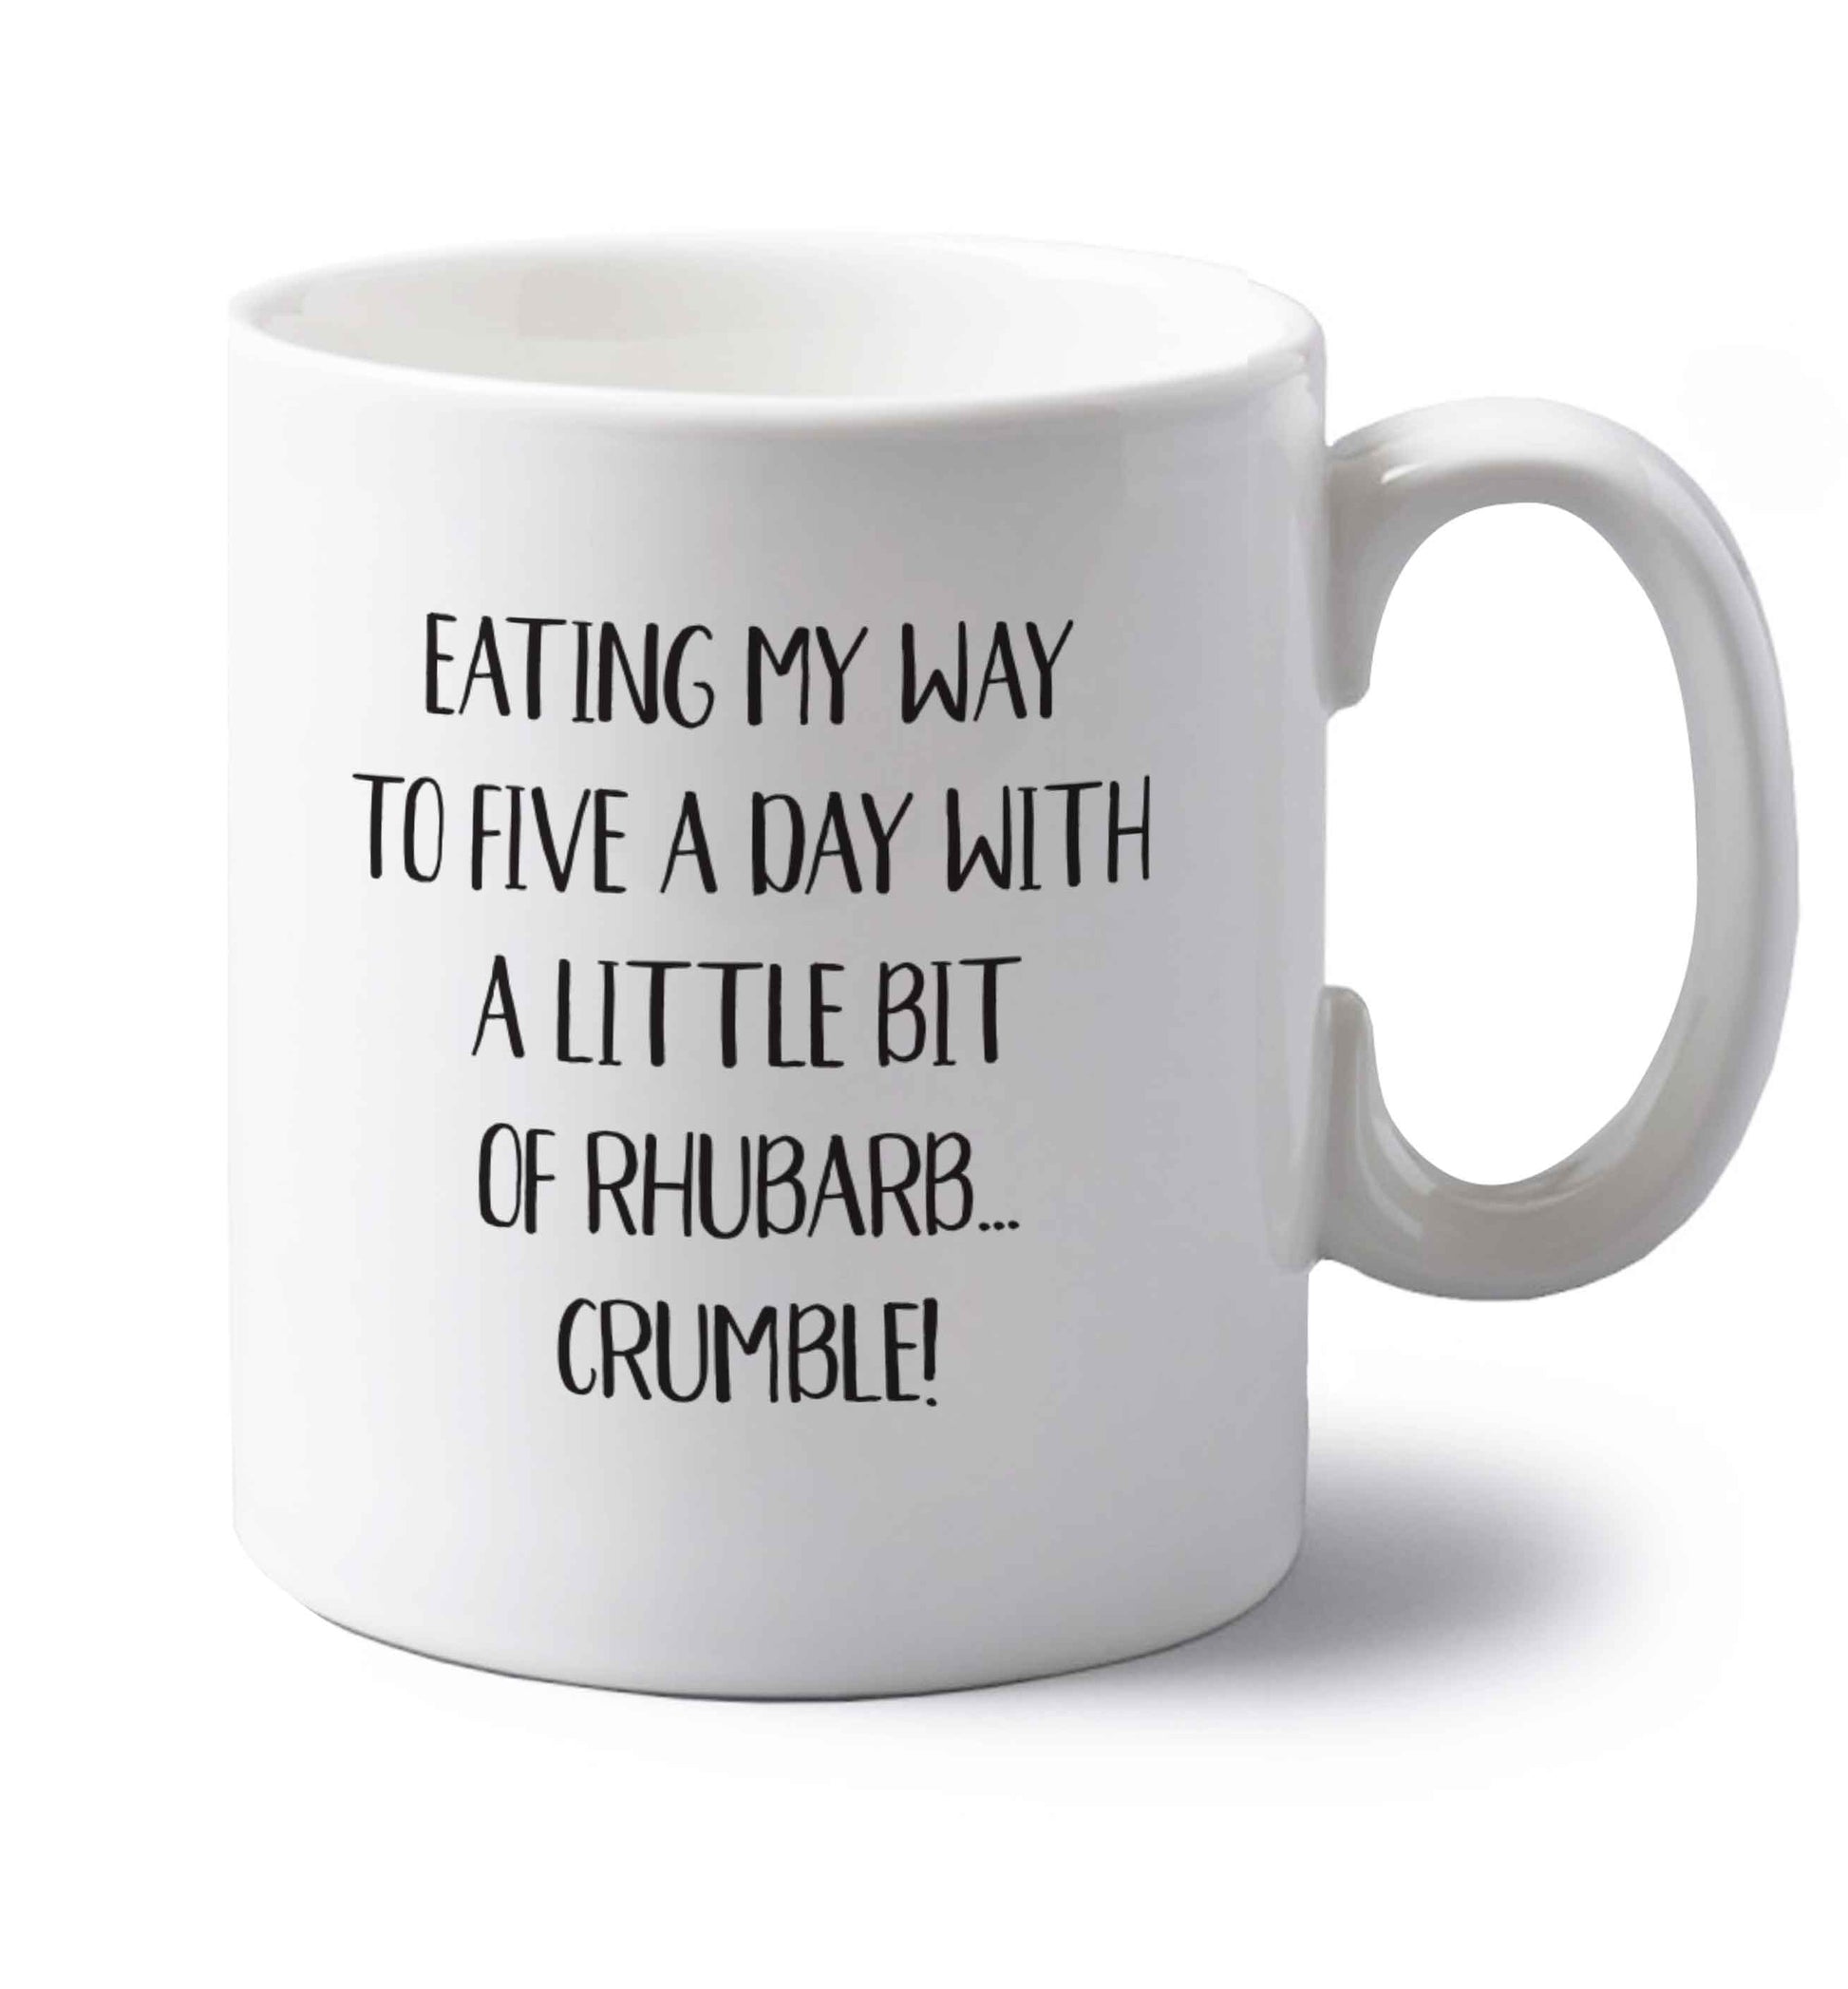 Eating my way to five a day with a little bit of rhubarb crumble left handed white ceramic mug 